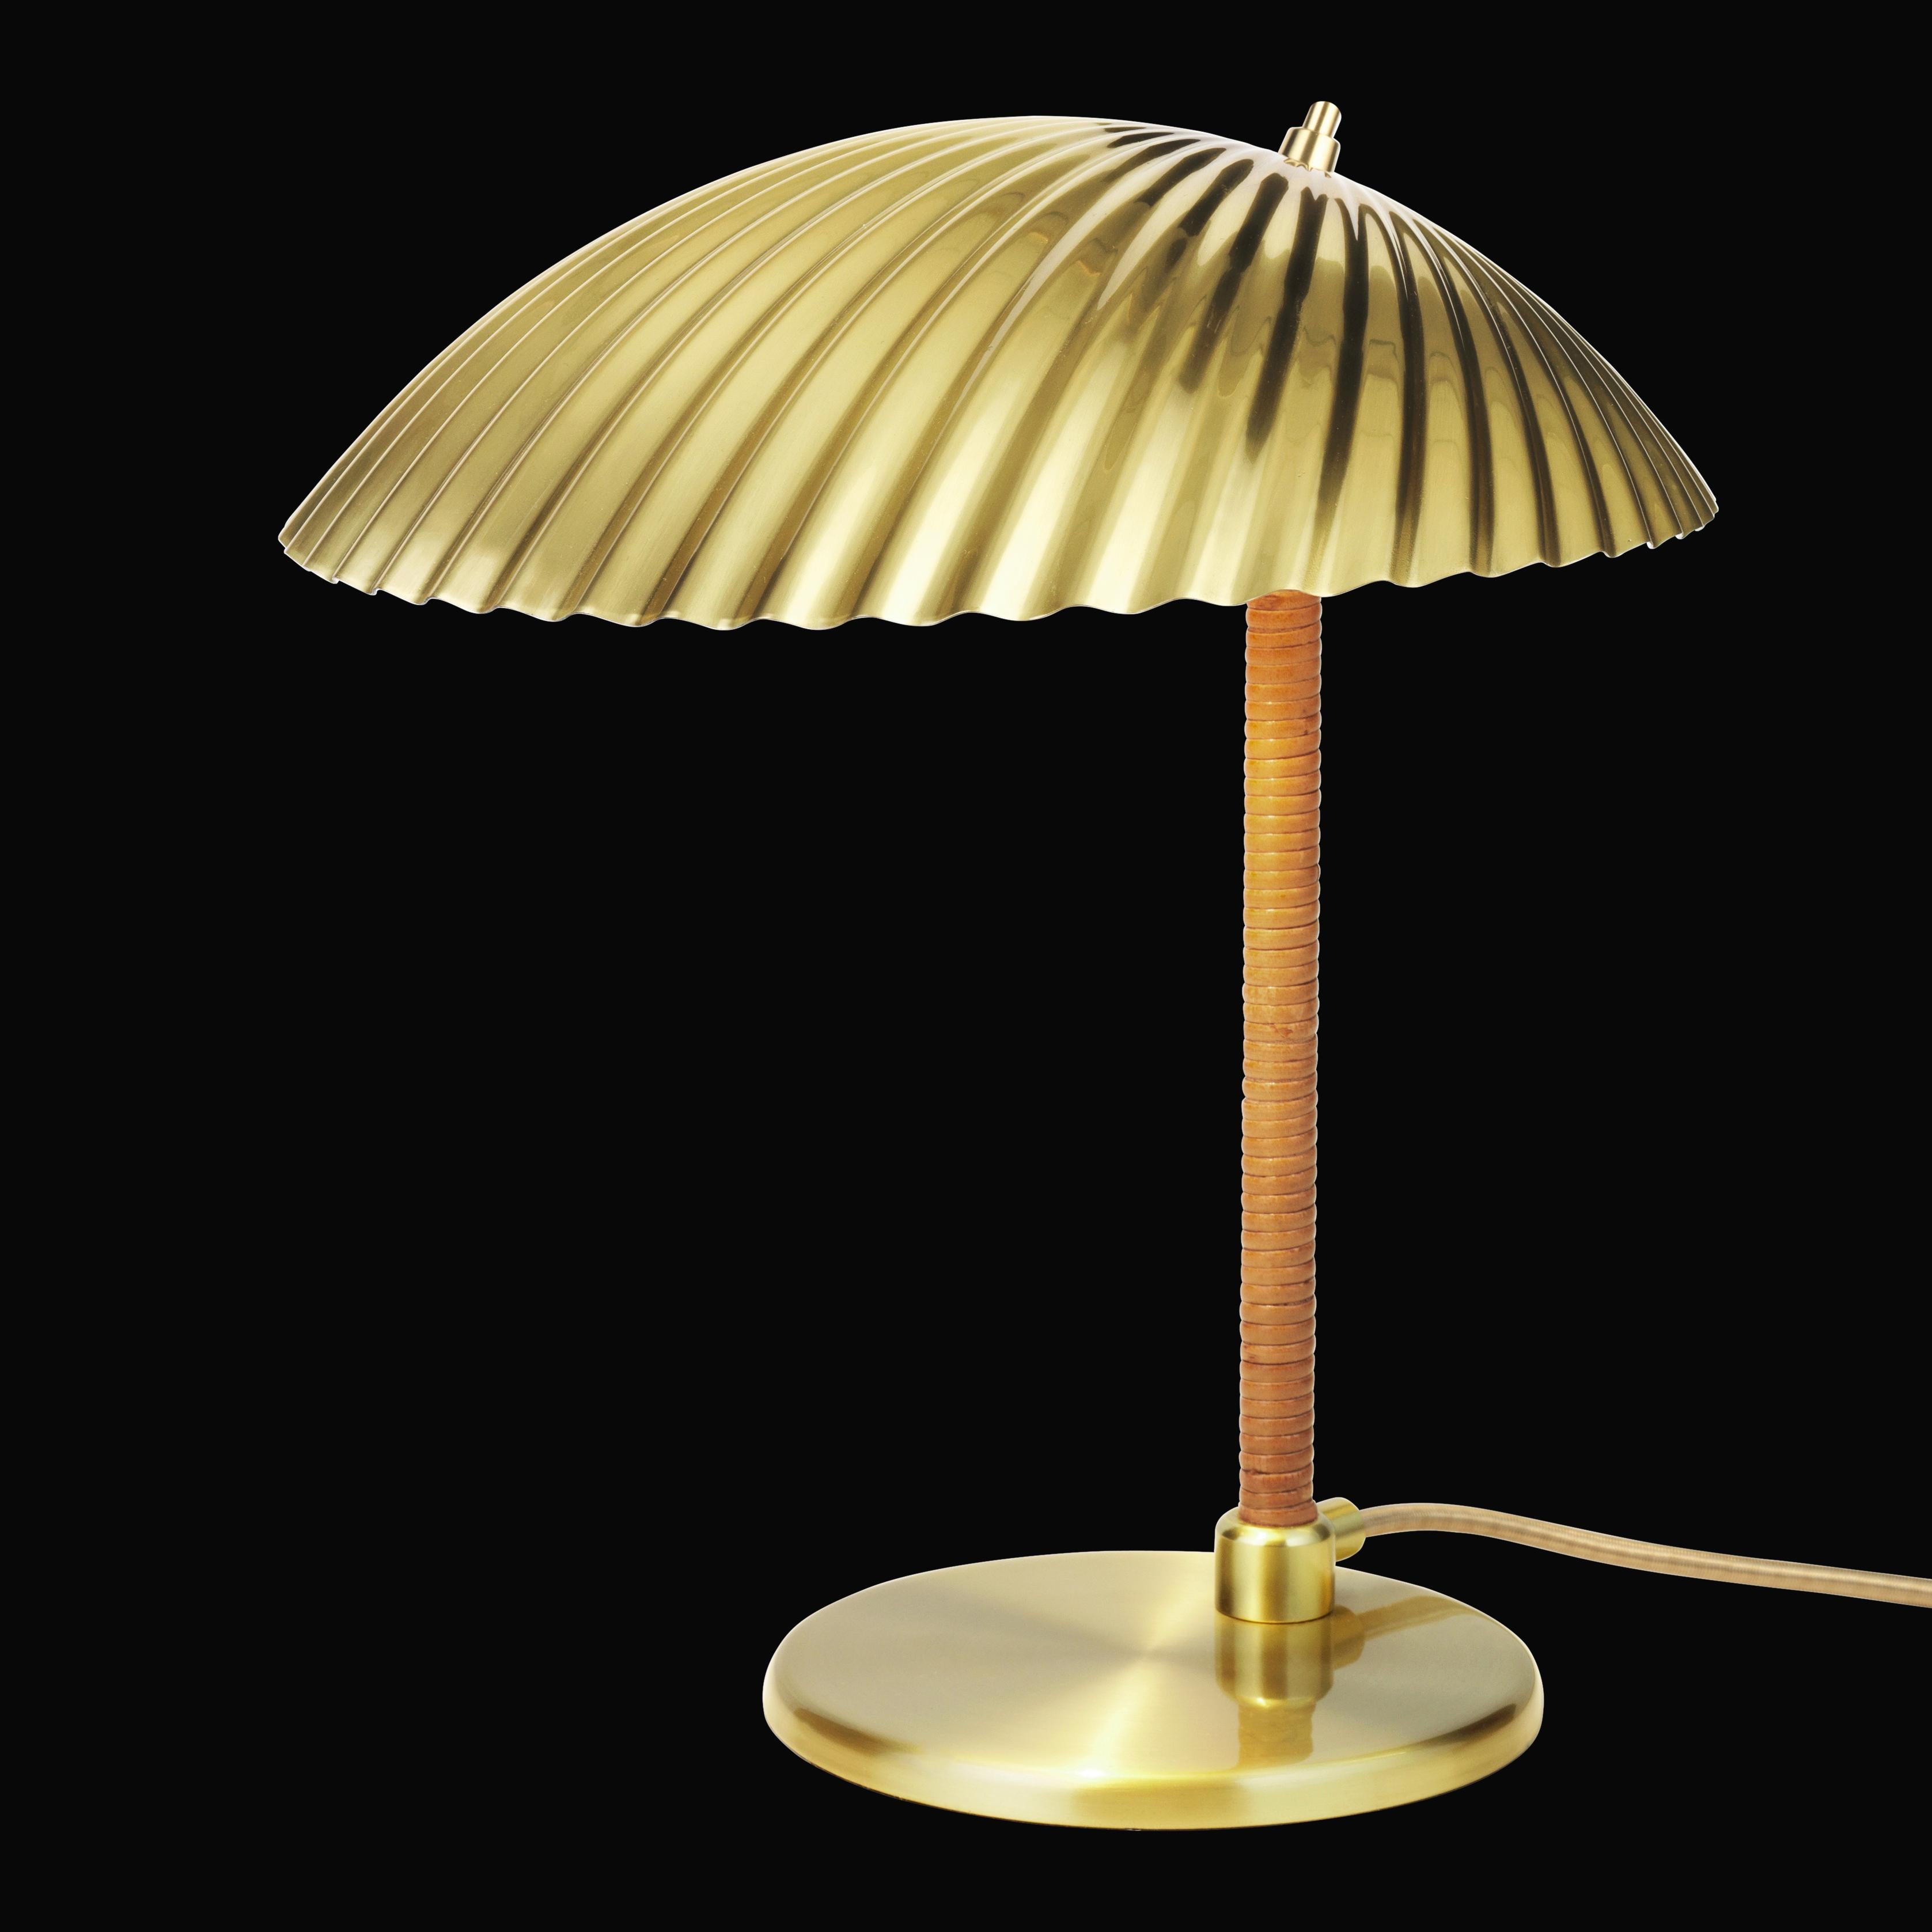 Designed by the Finnish designer Paavo Tynell in 1938, this Classic brass and rattan table lamp marks the early stages of Mid-Century Modernism, combining graceful simplicity with the elegant influence of nature in one design. This piece is a